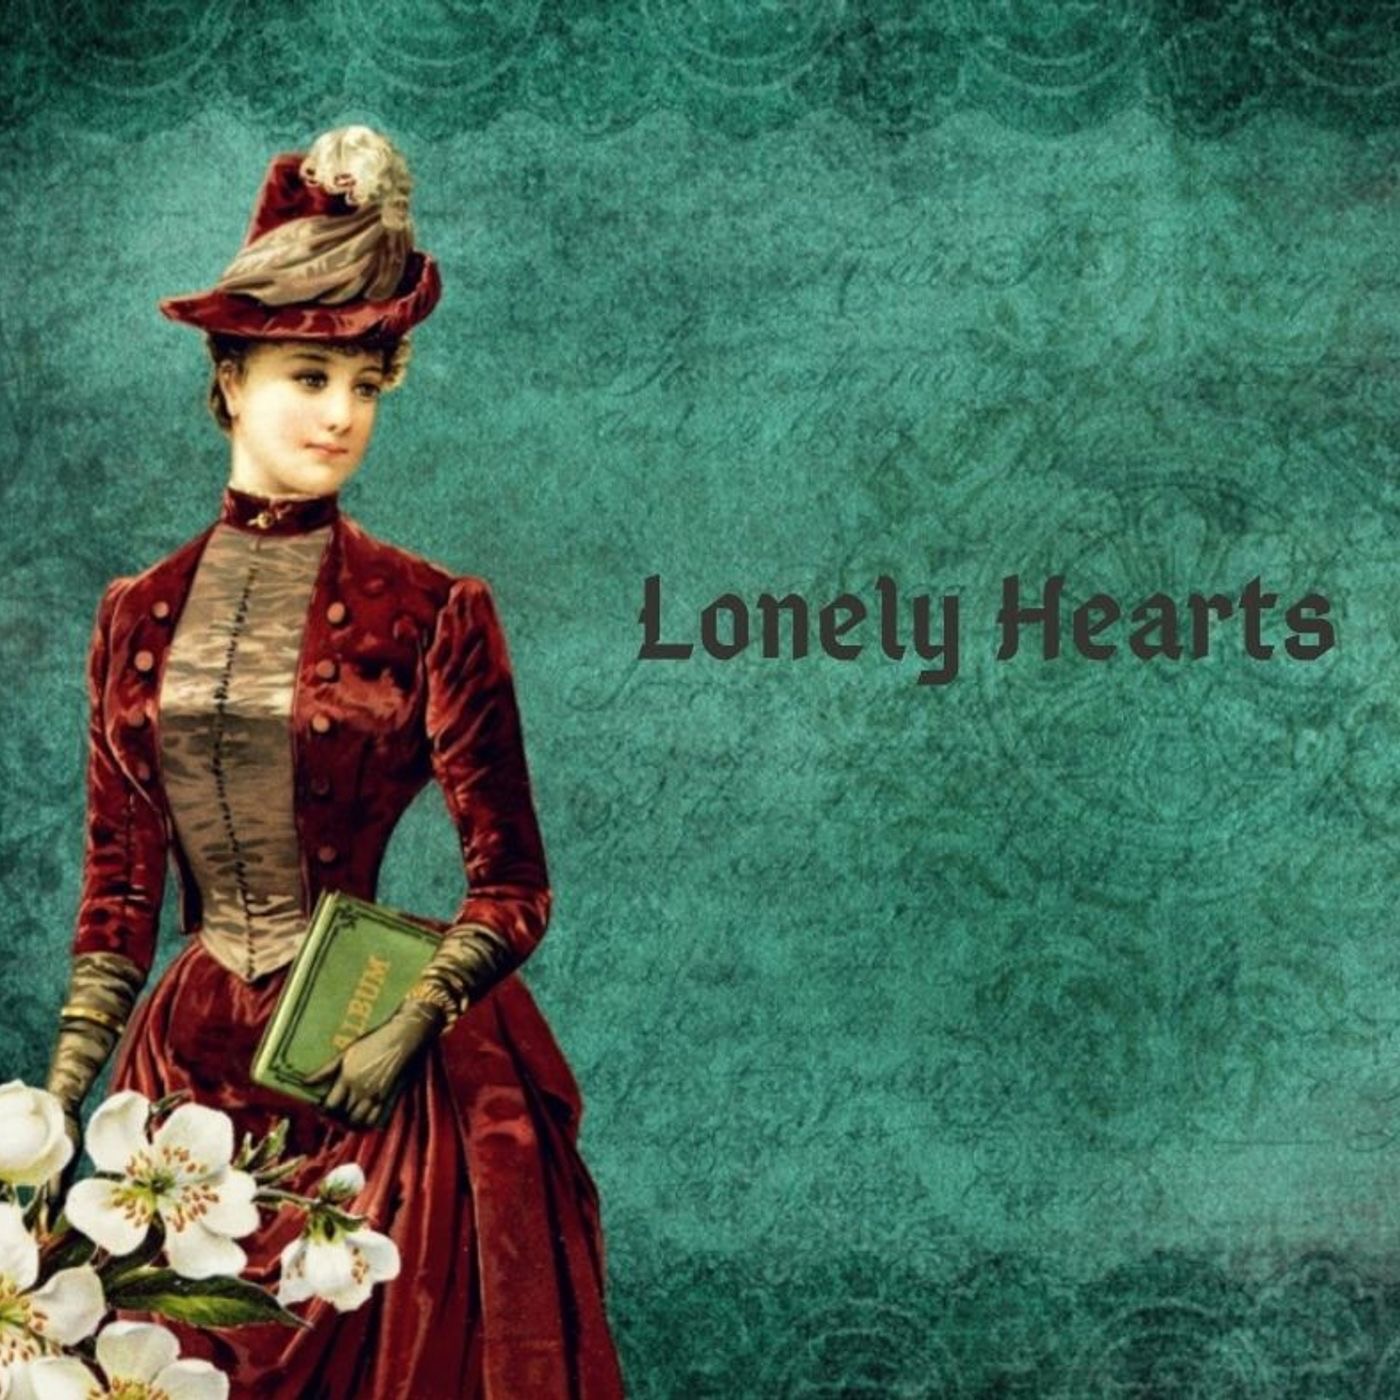 S5 Ep5: Lonely Hearts